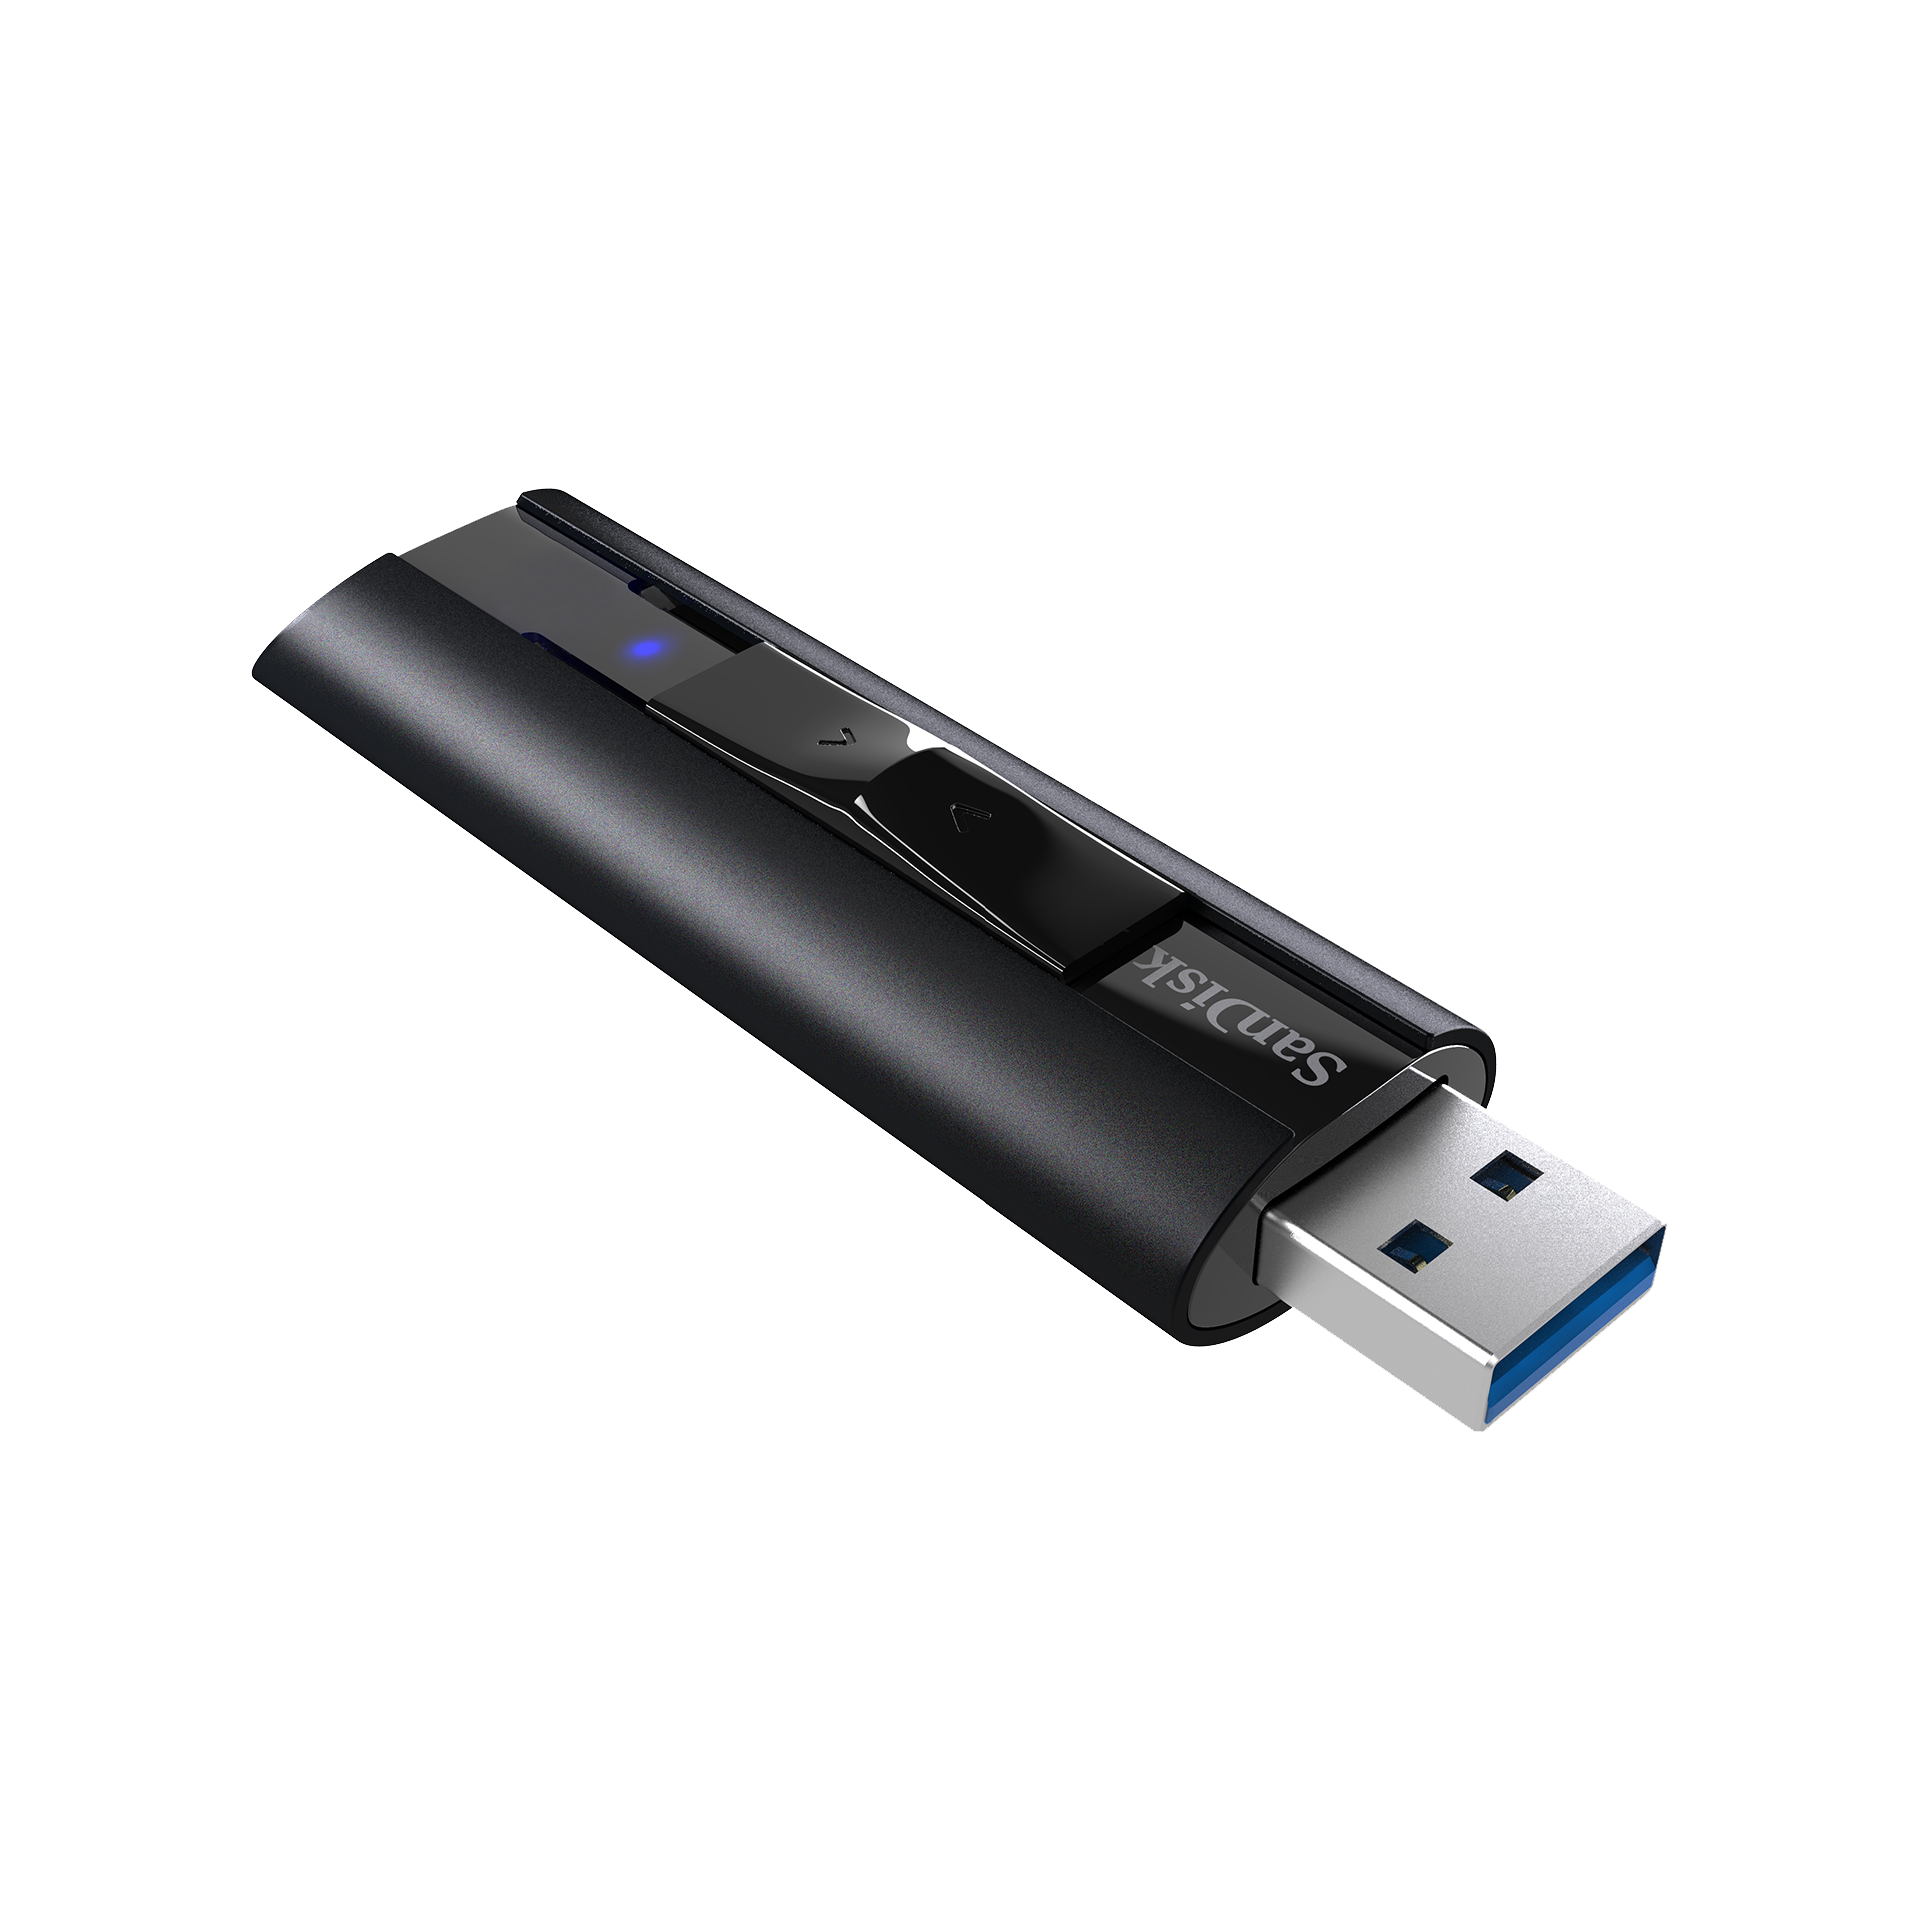 SanDisk 256GB Extreme PRO USB 3.2 Solid State Flash Drive - SDCZ880-256G-G46 - image 3 of 4